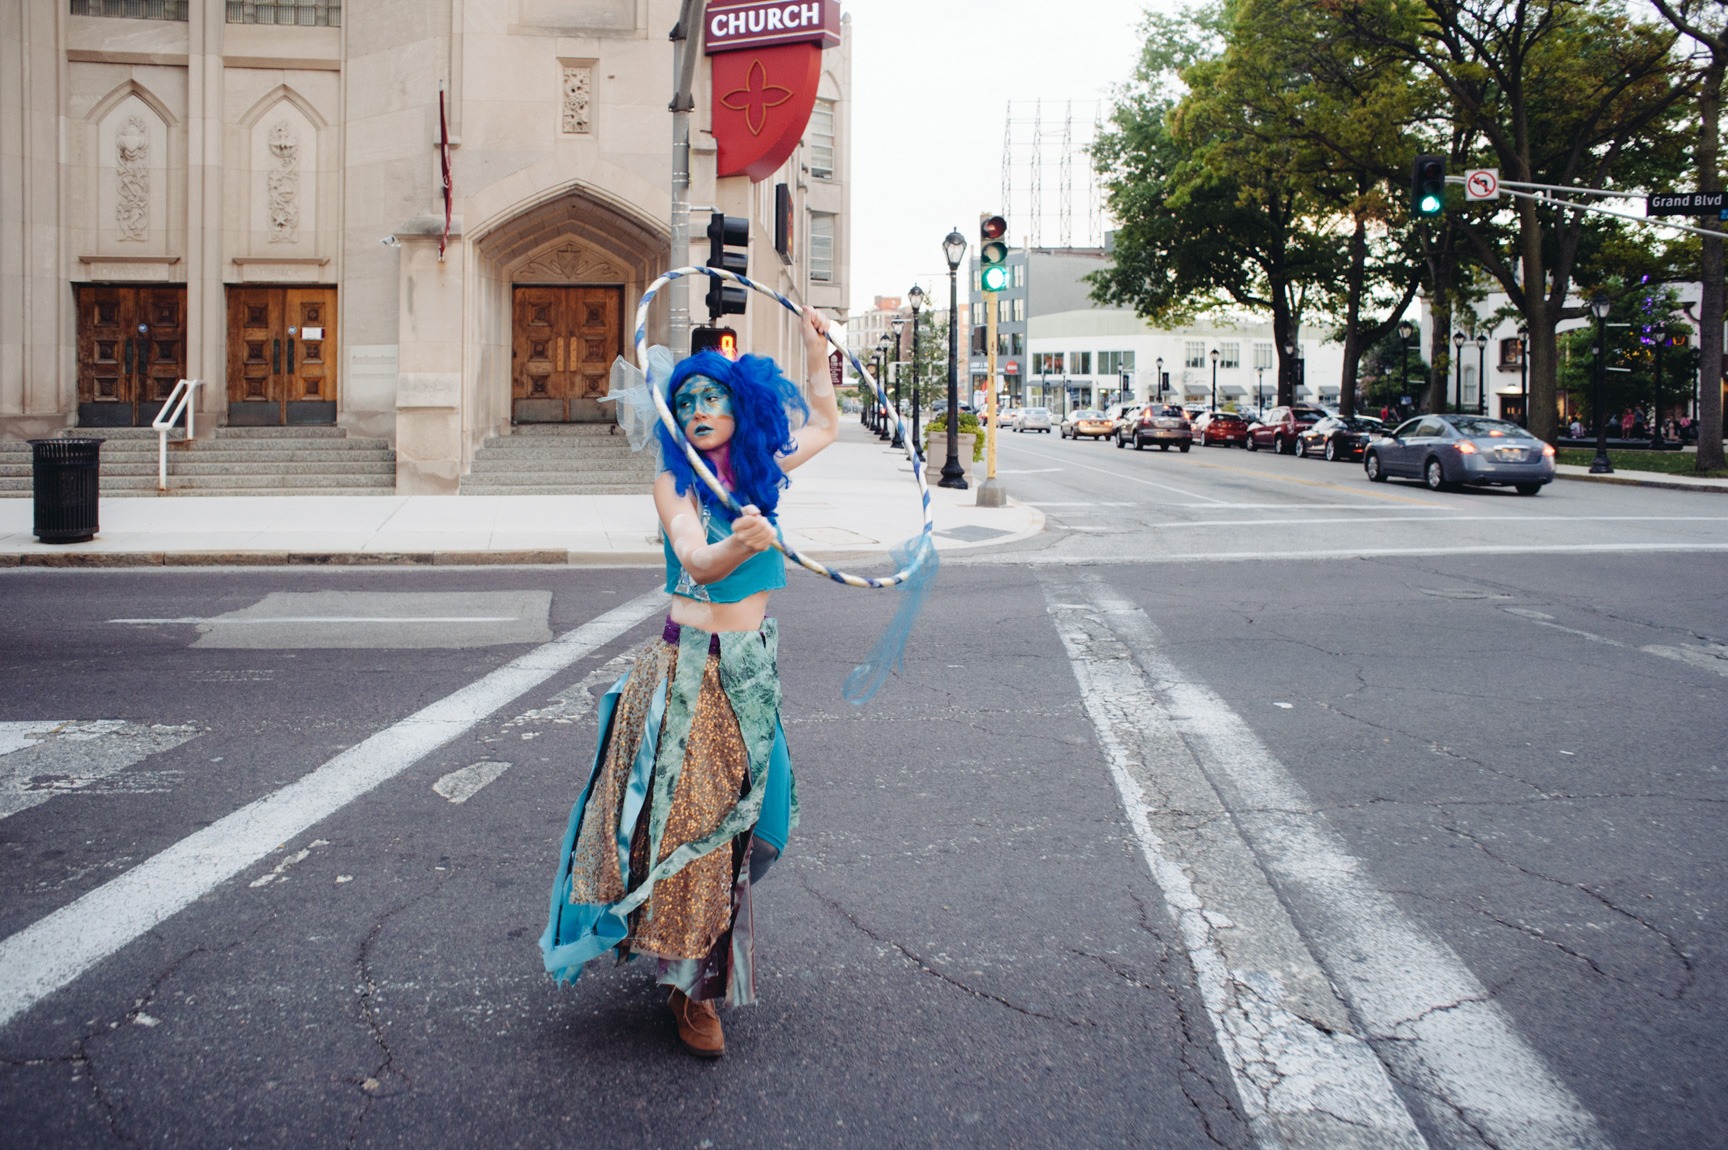 A performer wearing a blue wig and blue makeup carries a hula hoop above their head and crosses a street.